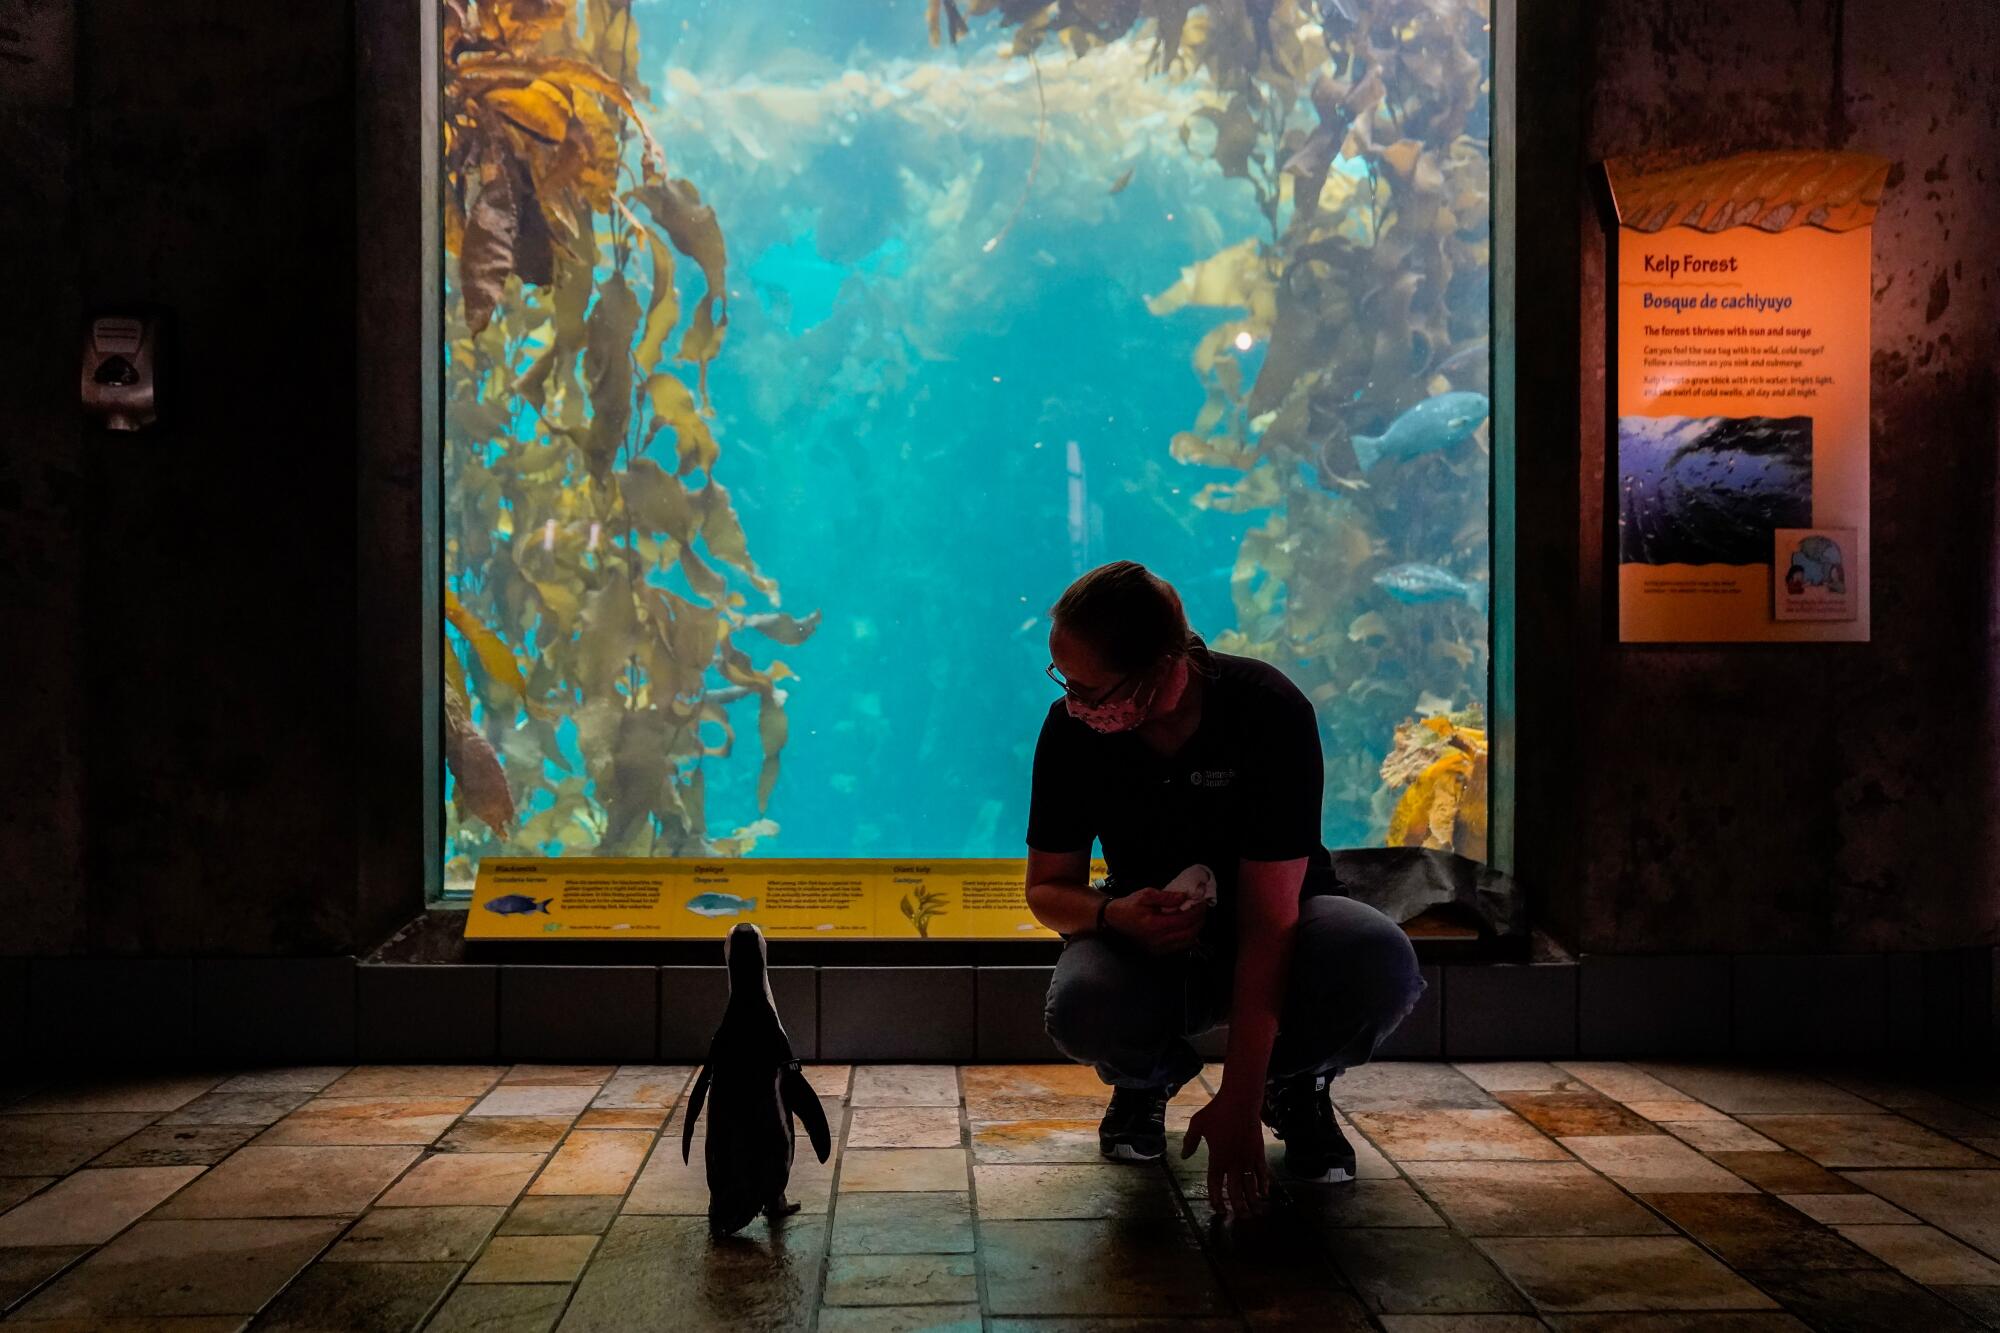 An aquarium worker kneels down next to a small penguin peeking into a tank filled with kelp and fish